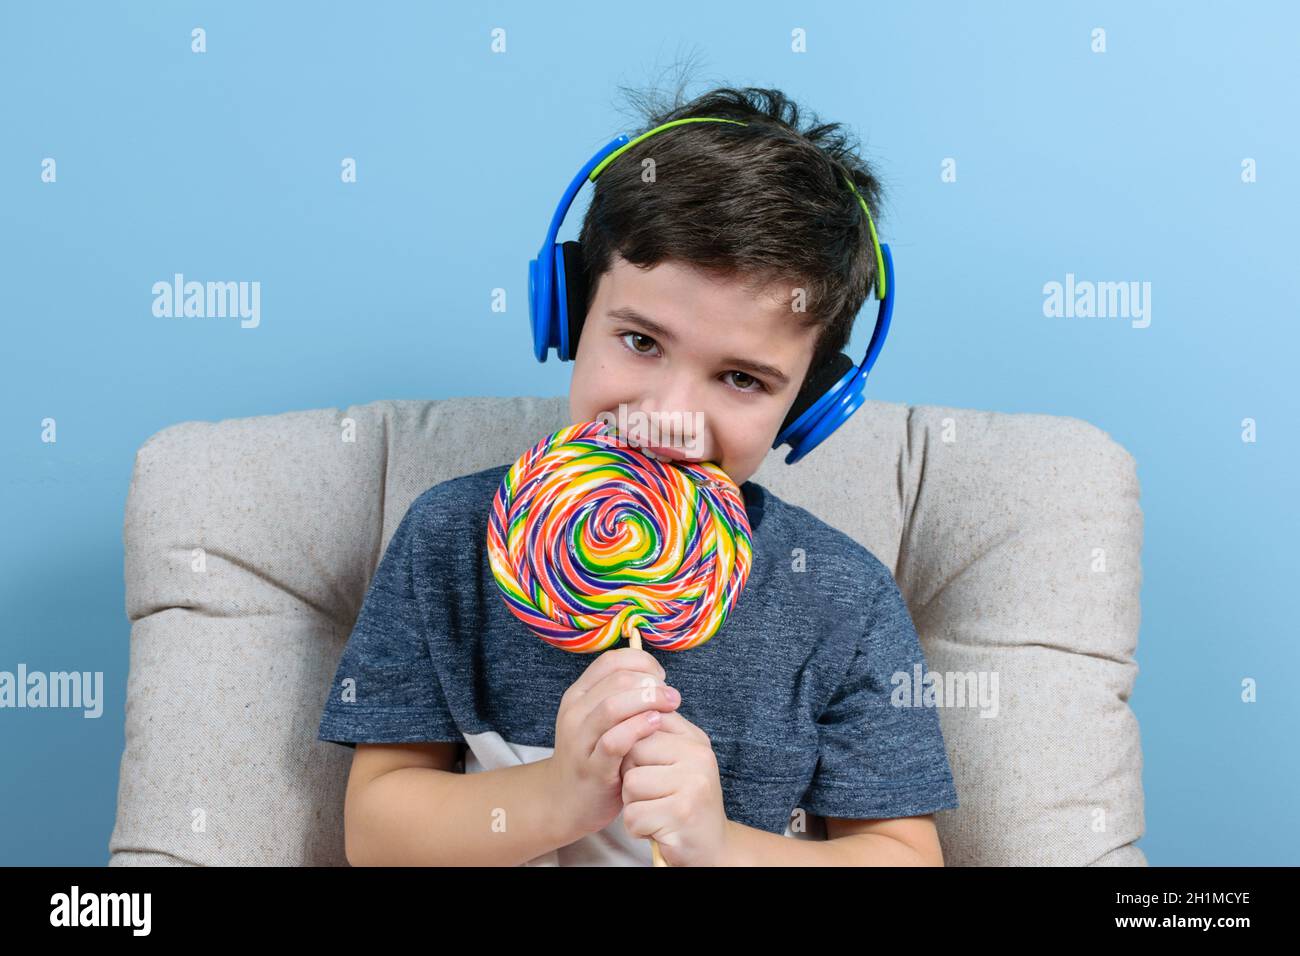 8 year old child with headphone and biting a big colorful lollipop. Stock Photo